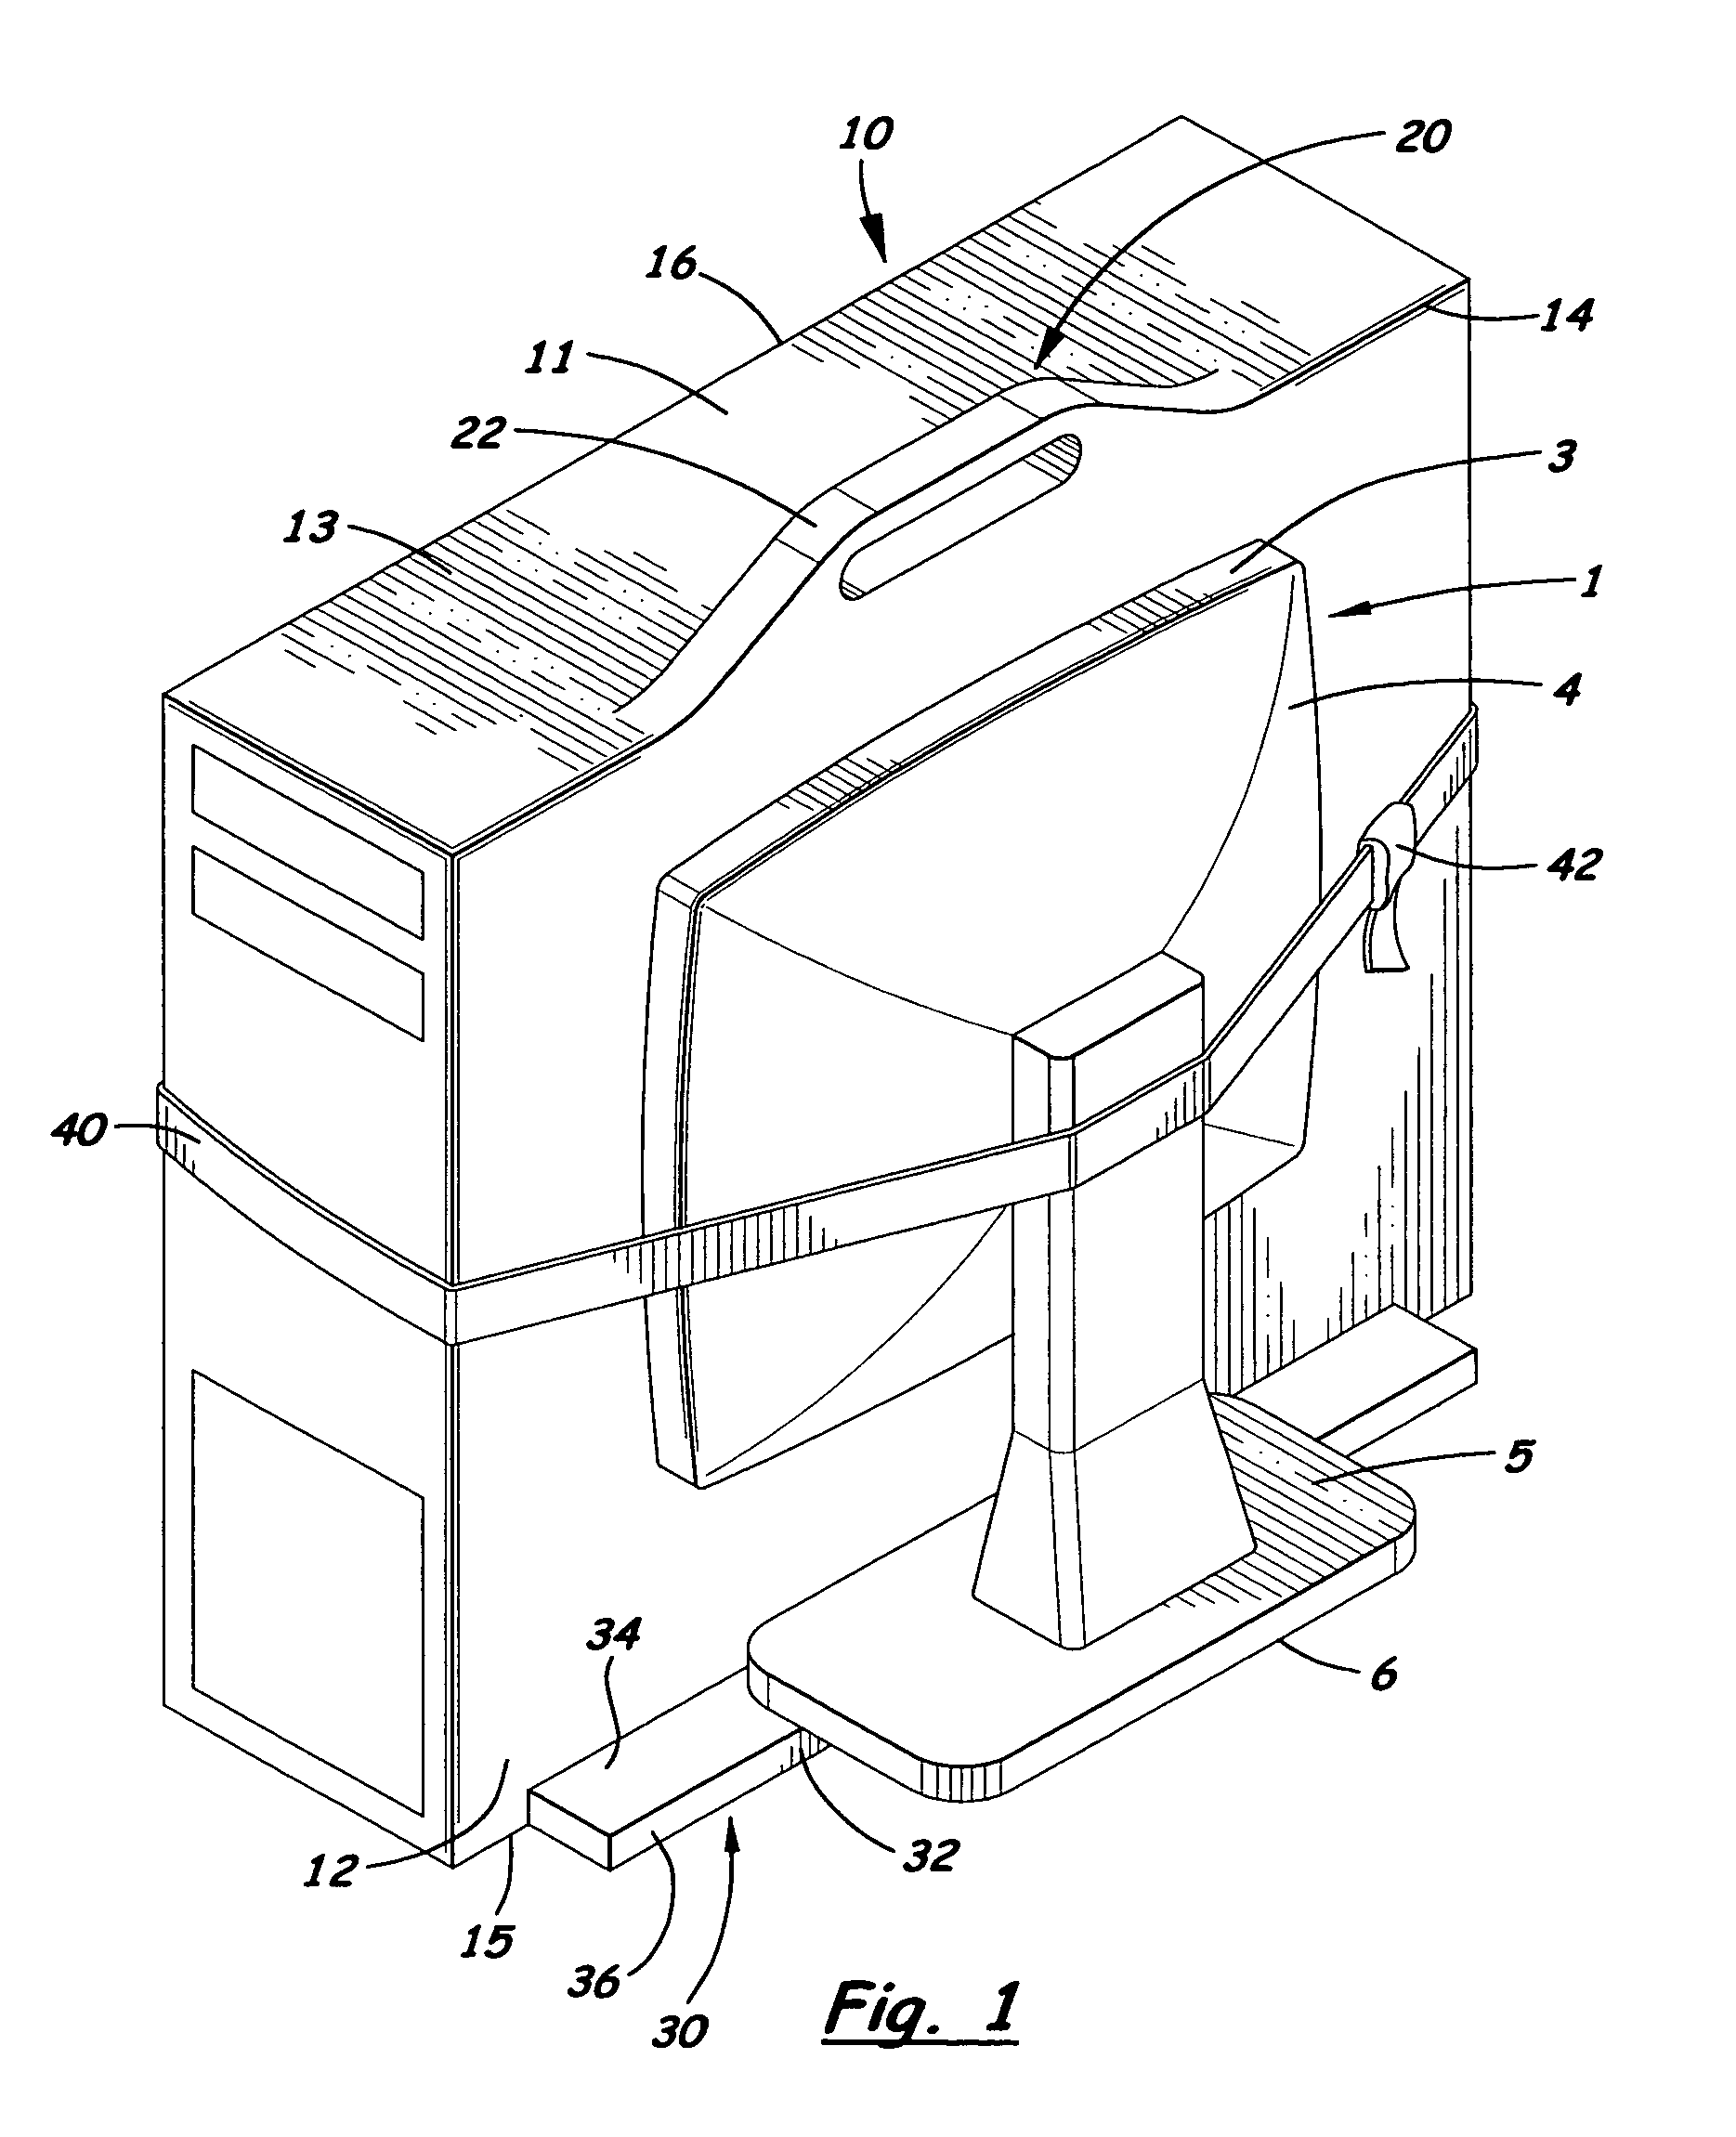 System for facilitating transport of a desktop/tower computer case and display monitor